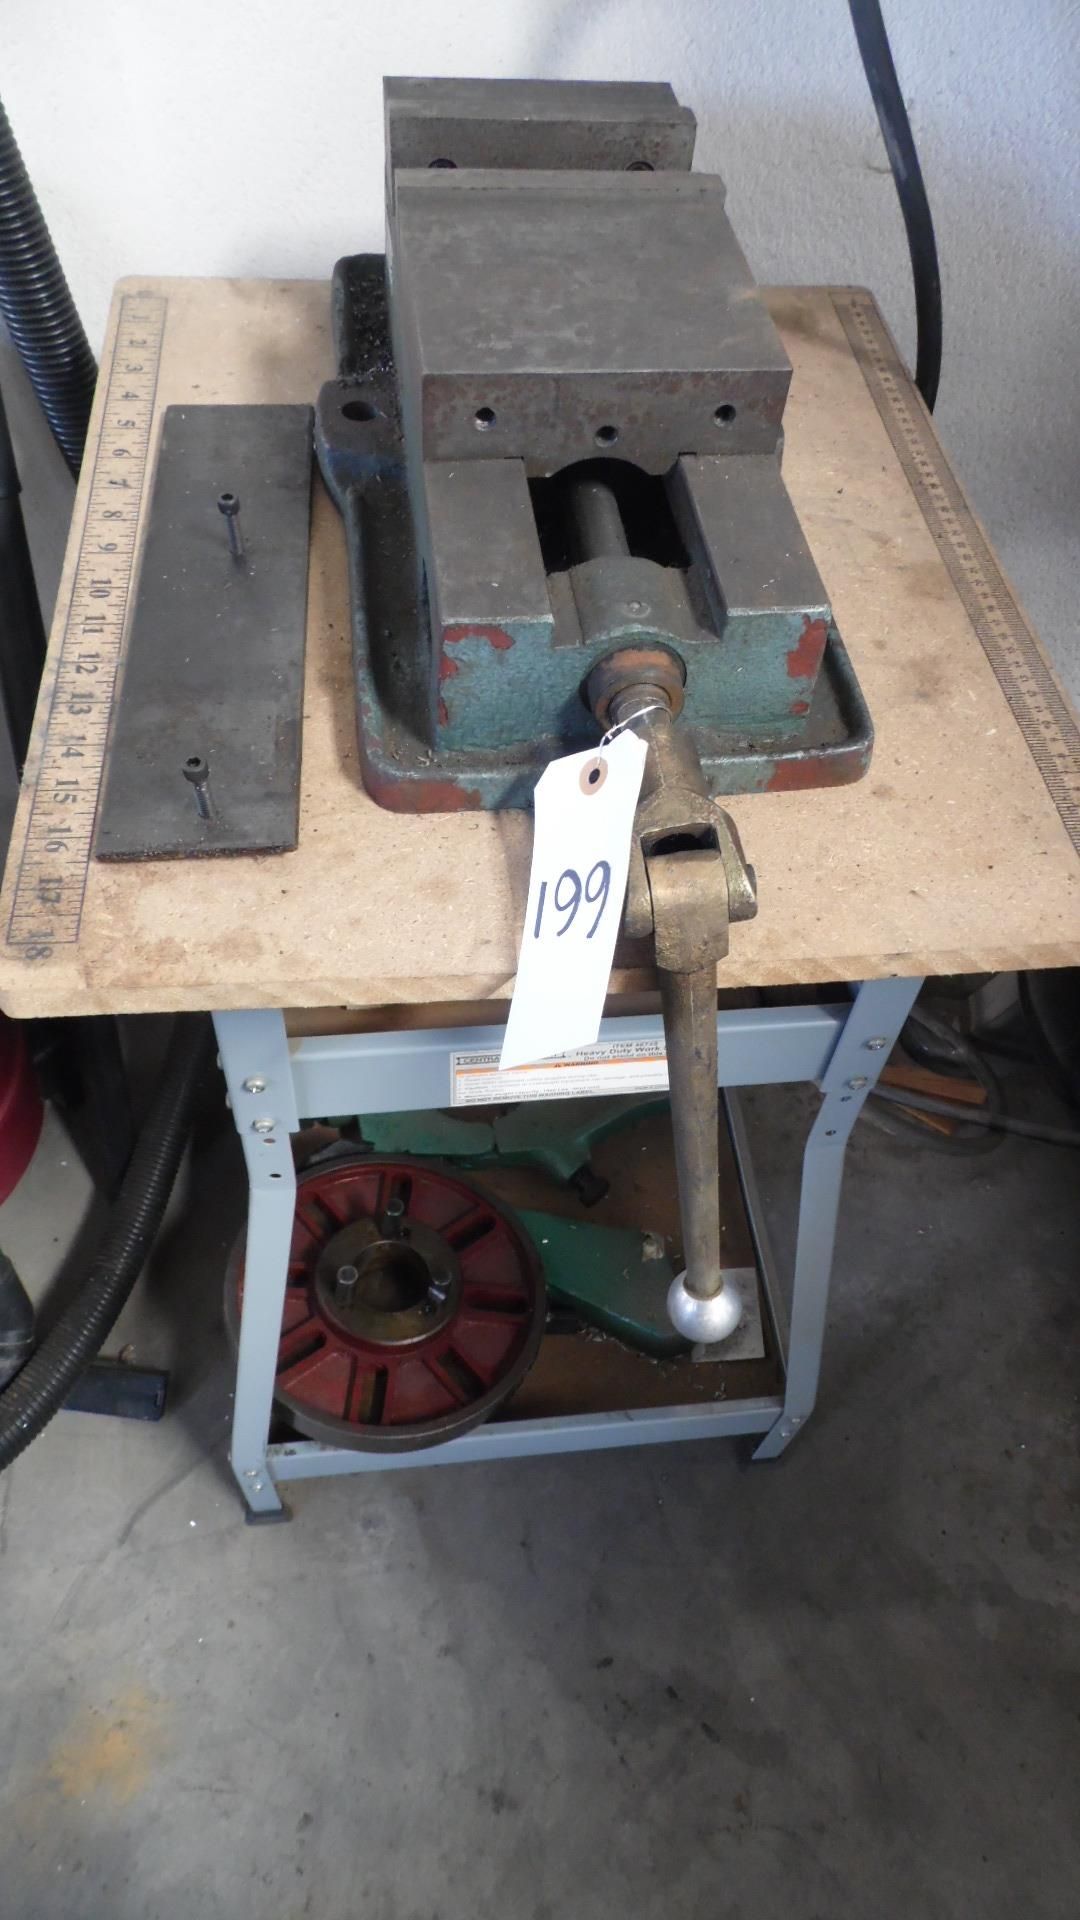 VISE - PLATE - STEADY REST